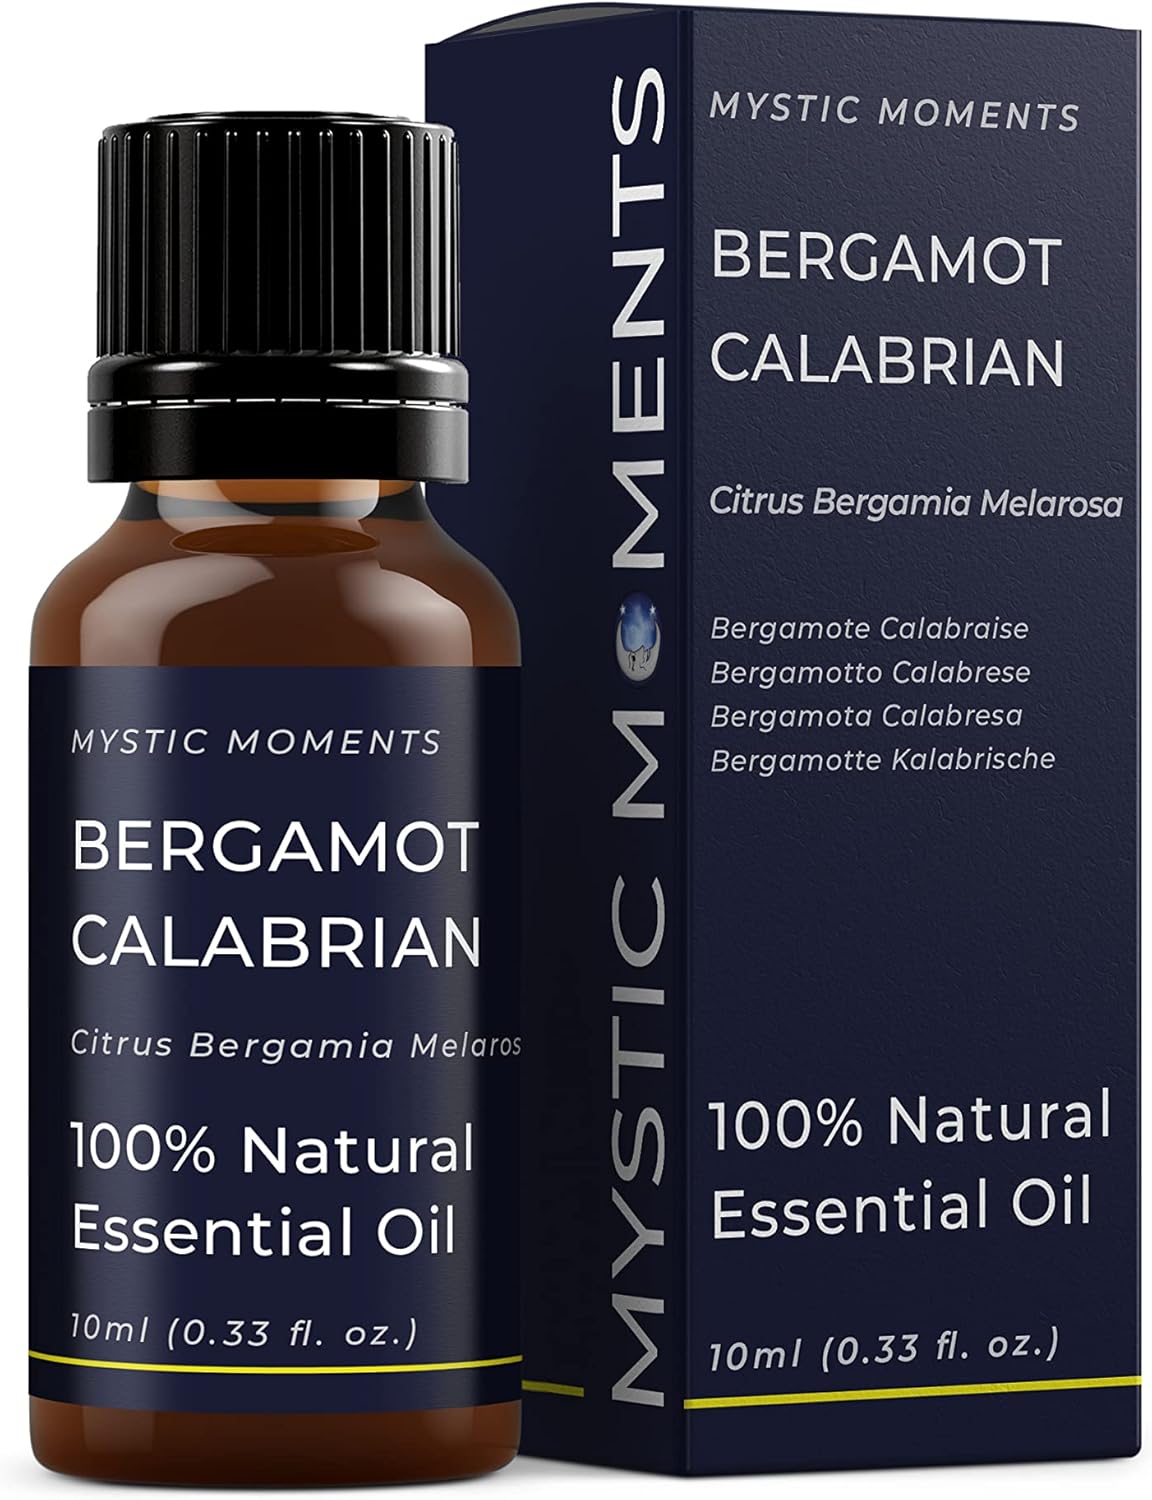 Mystic Moments | Bergamot Calabrian Essential Oil 10ml - Natural oil for Diffusers, Aromatherapy & Massage Blends Vegan GMO Free